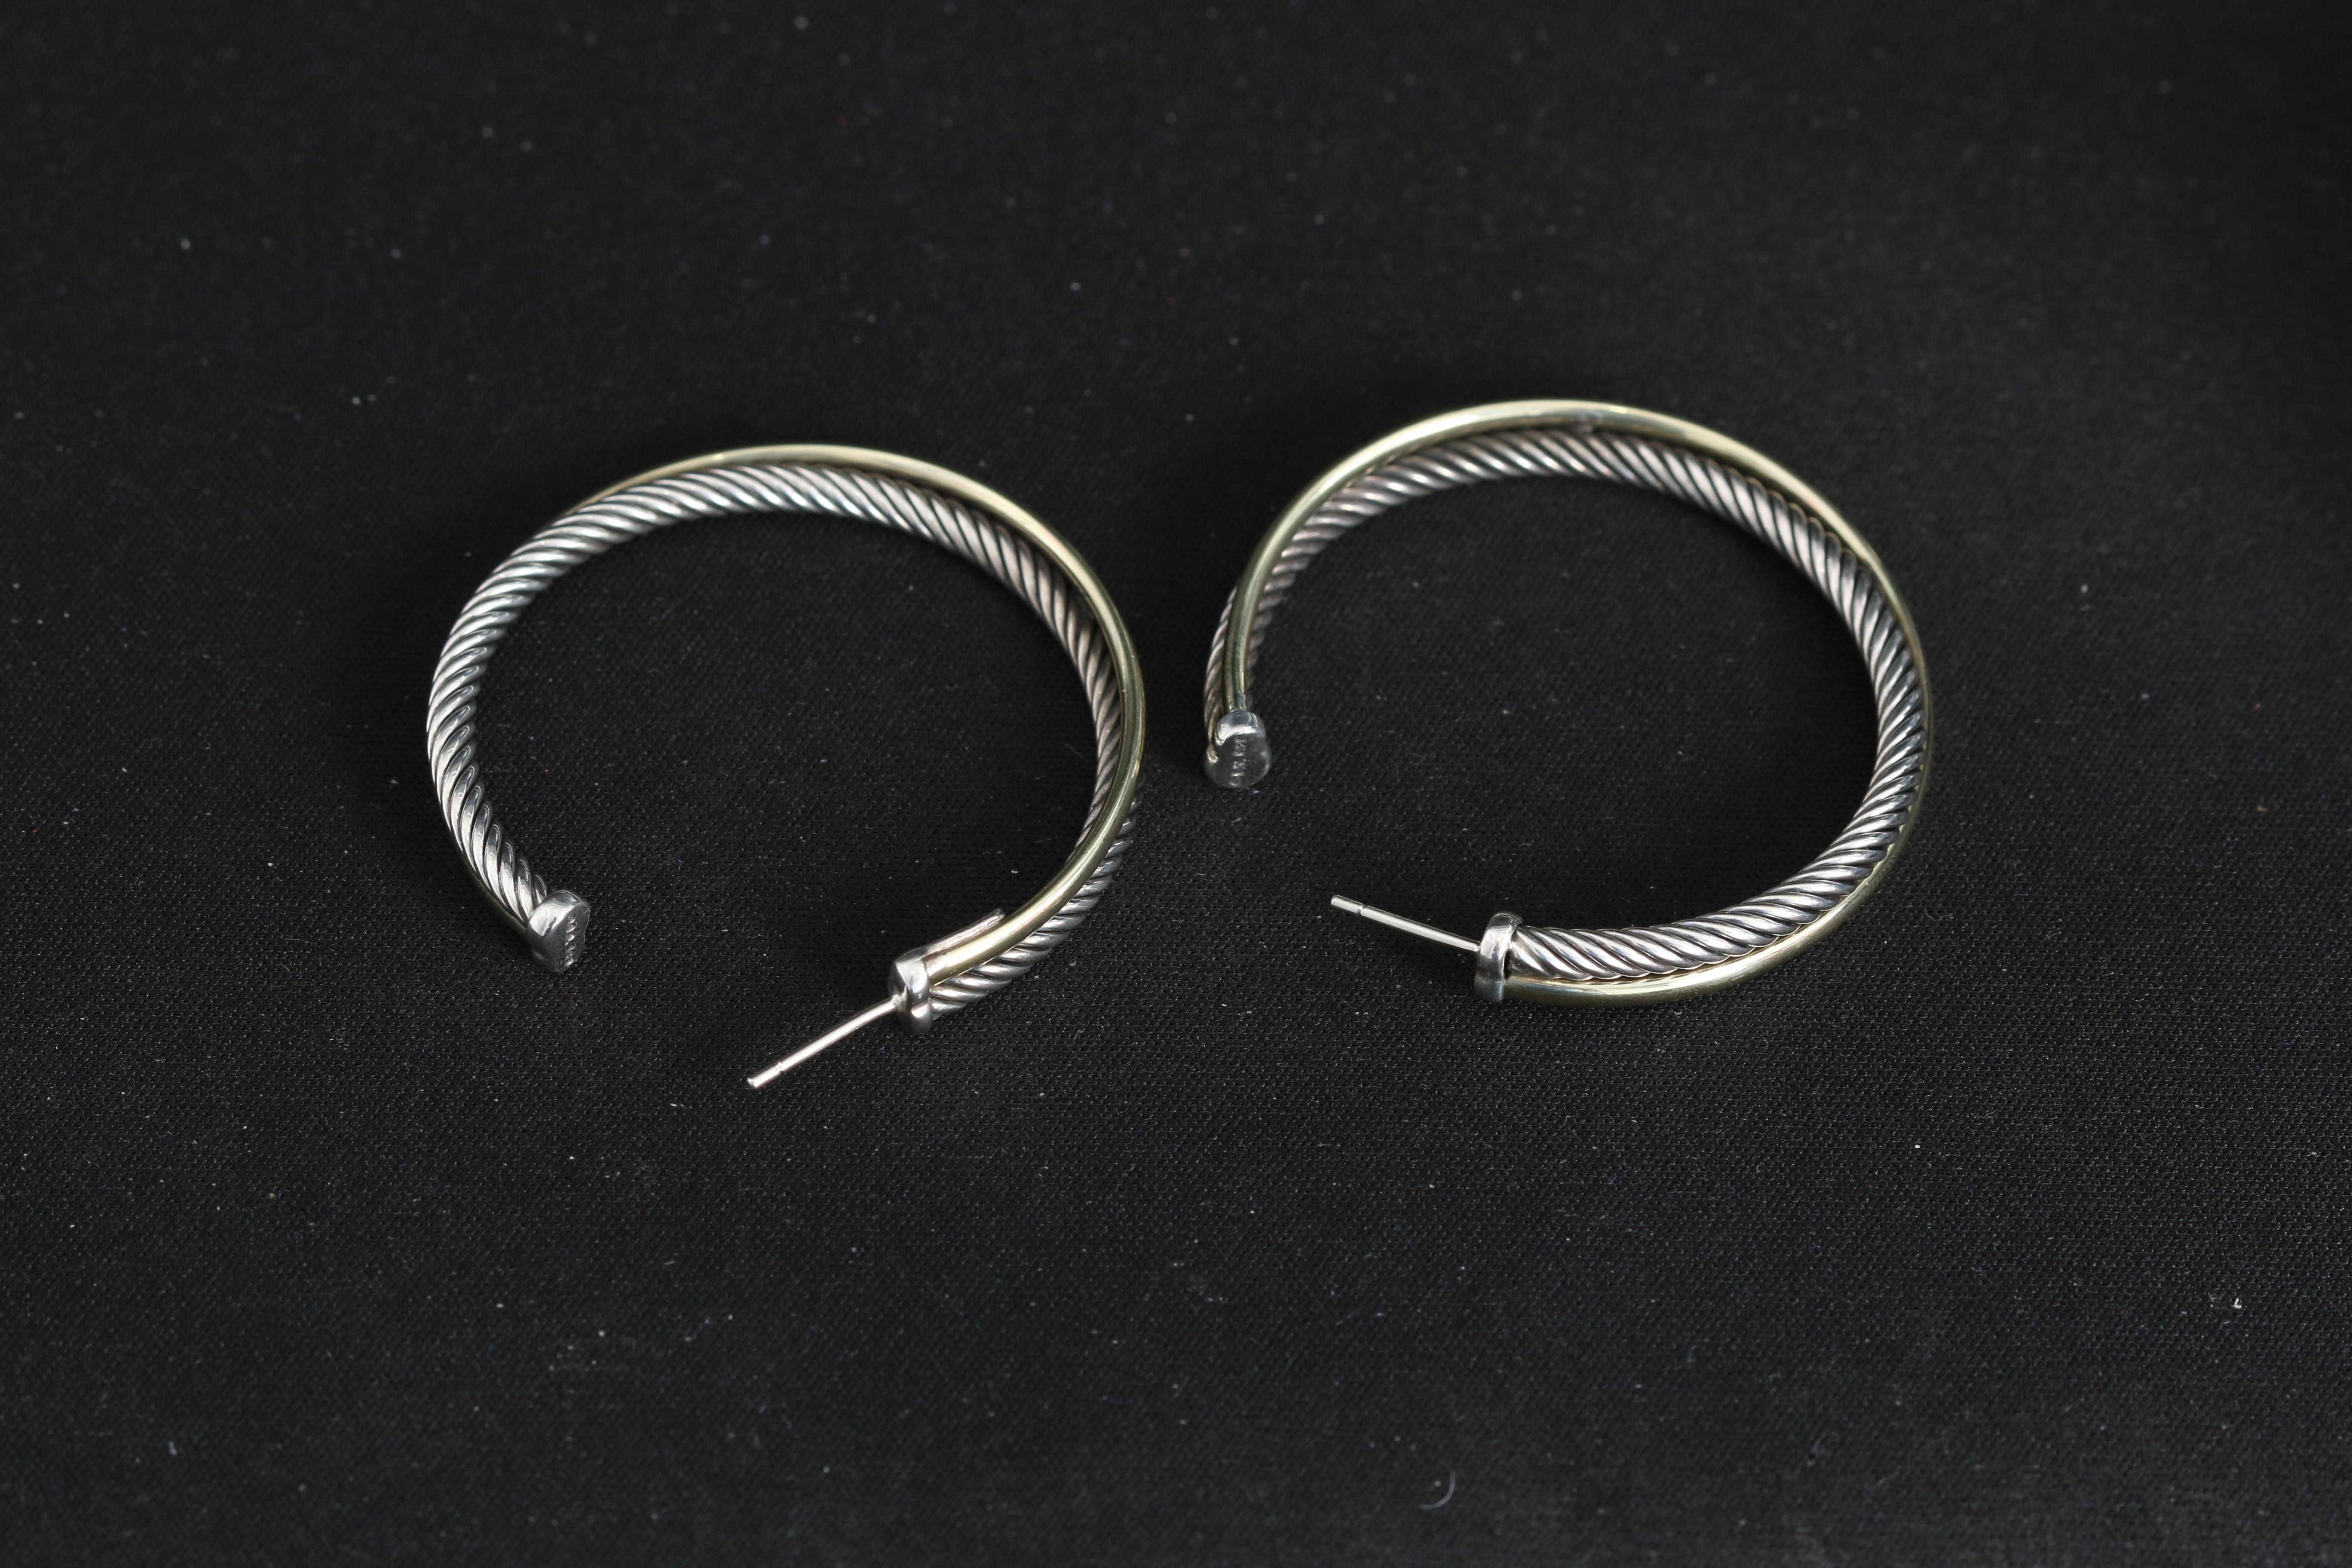 David Yurman Crossover Cable Hoop  Earrings  - Crossover cable hoops earring sin sterling silver and 18K Yellow gold .Earring measurements  44 x 4.5mm. Hallmarked with David Yurman pouch .